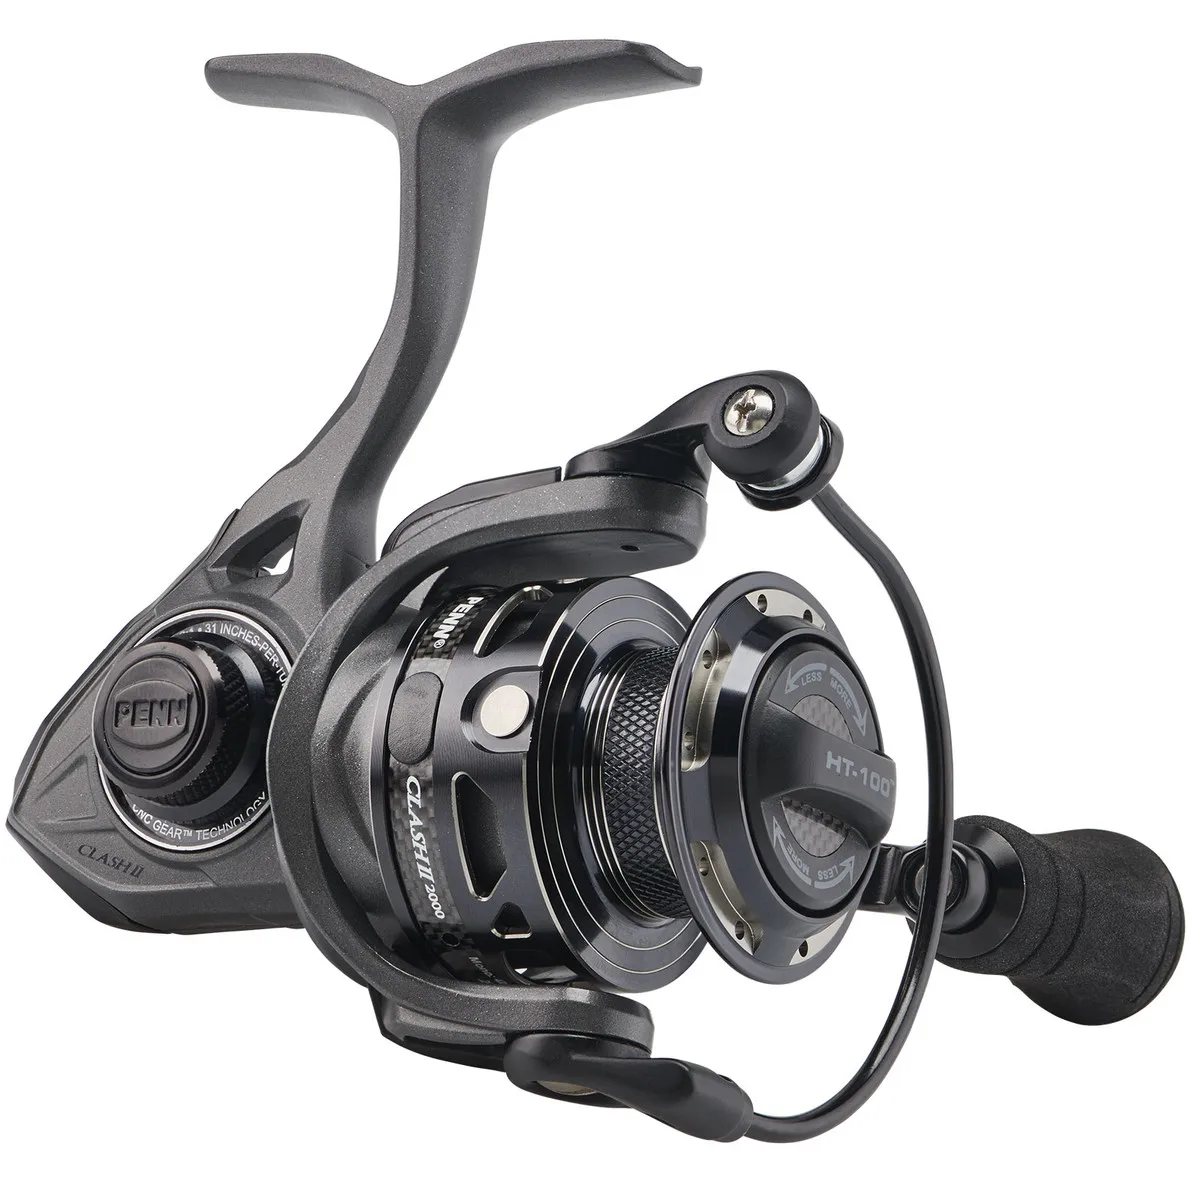 

Penn Clash II Spinning Fishing Reel ( Without Original Packages or Manuals)